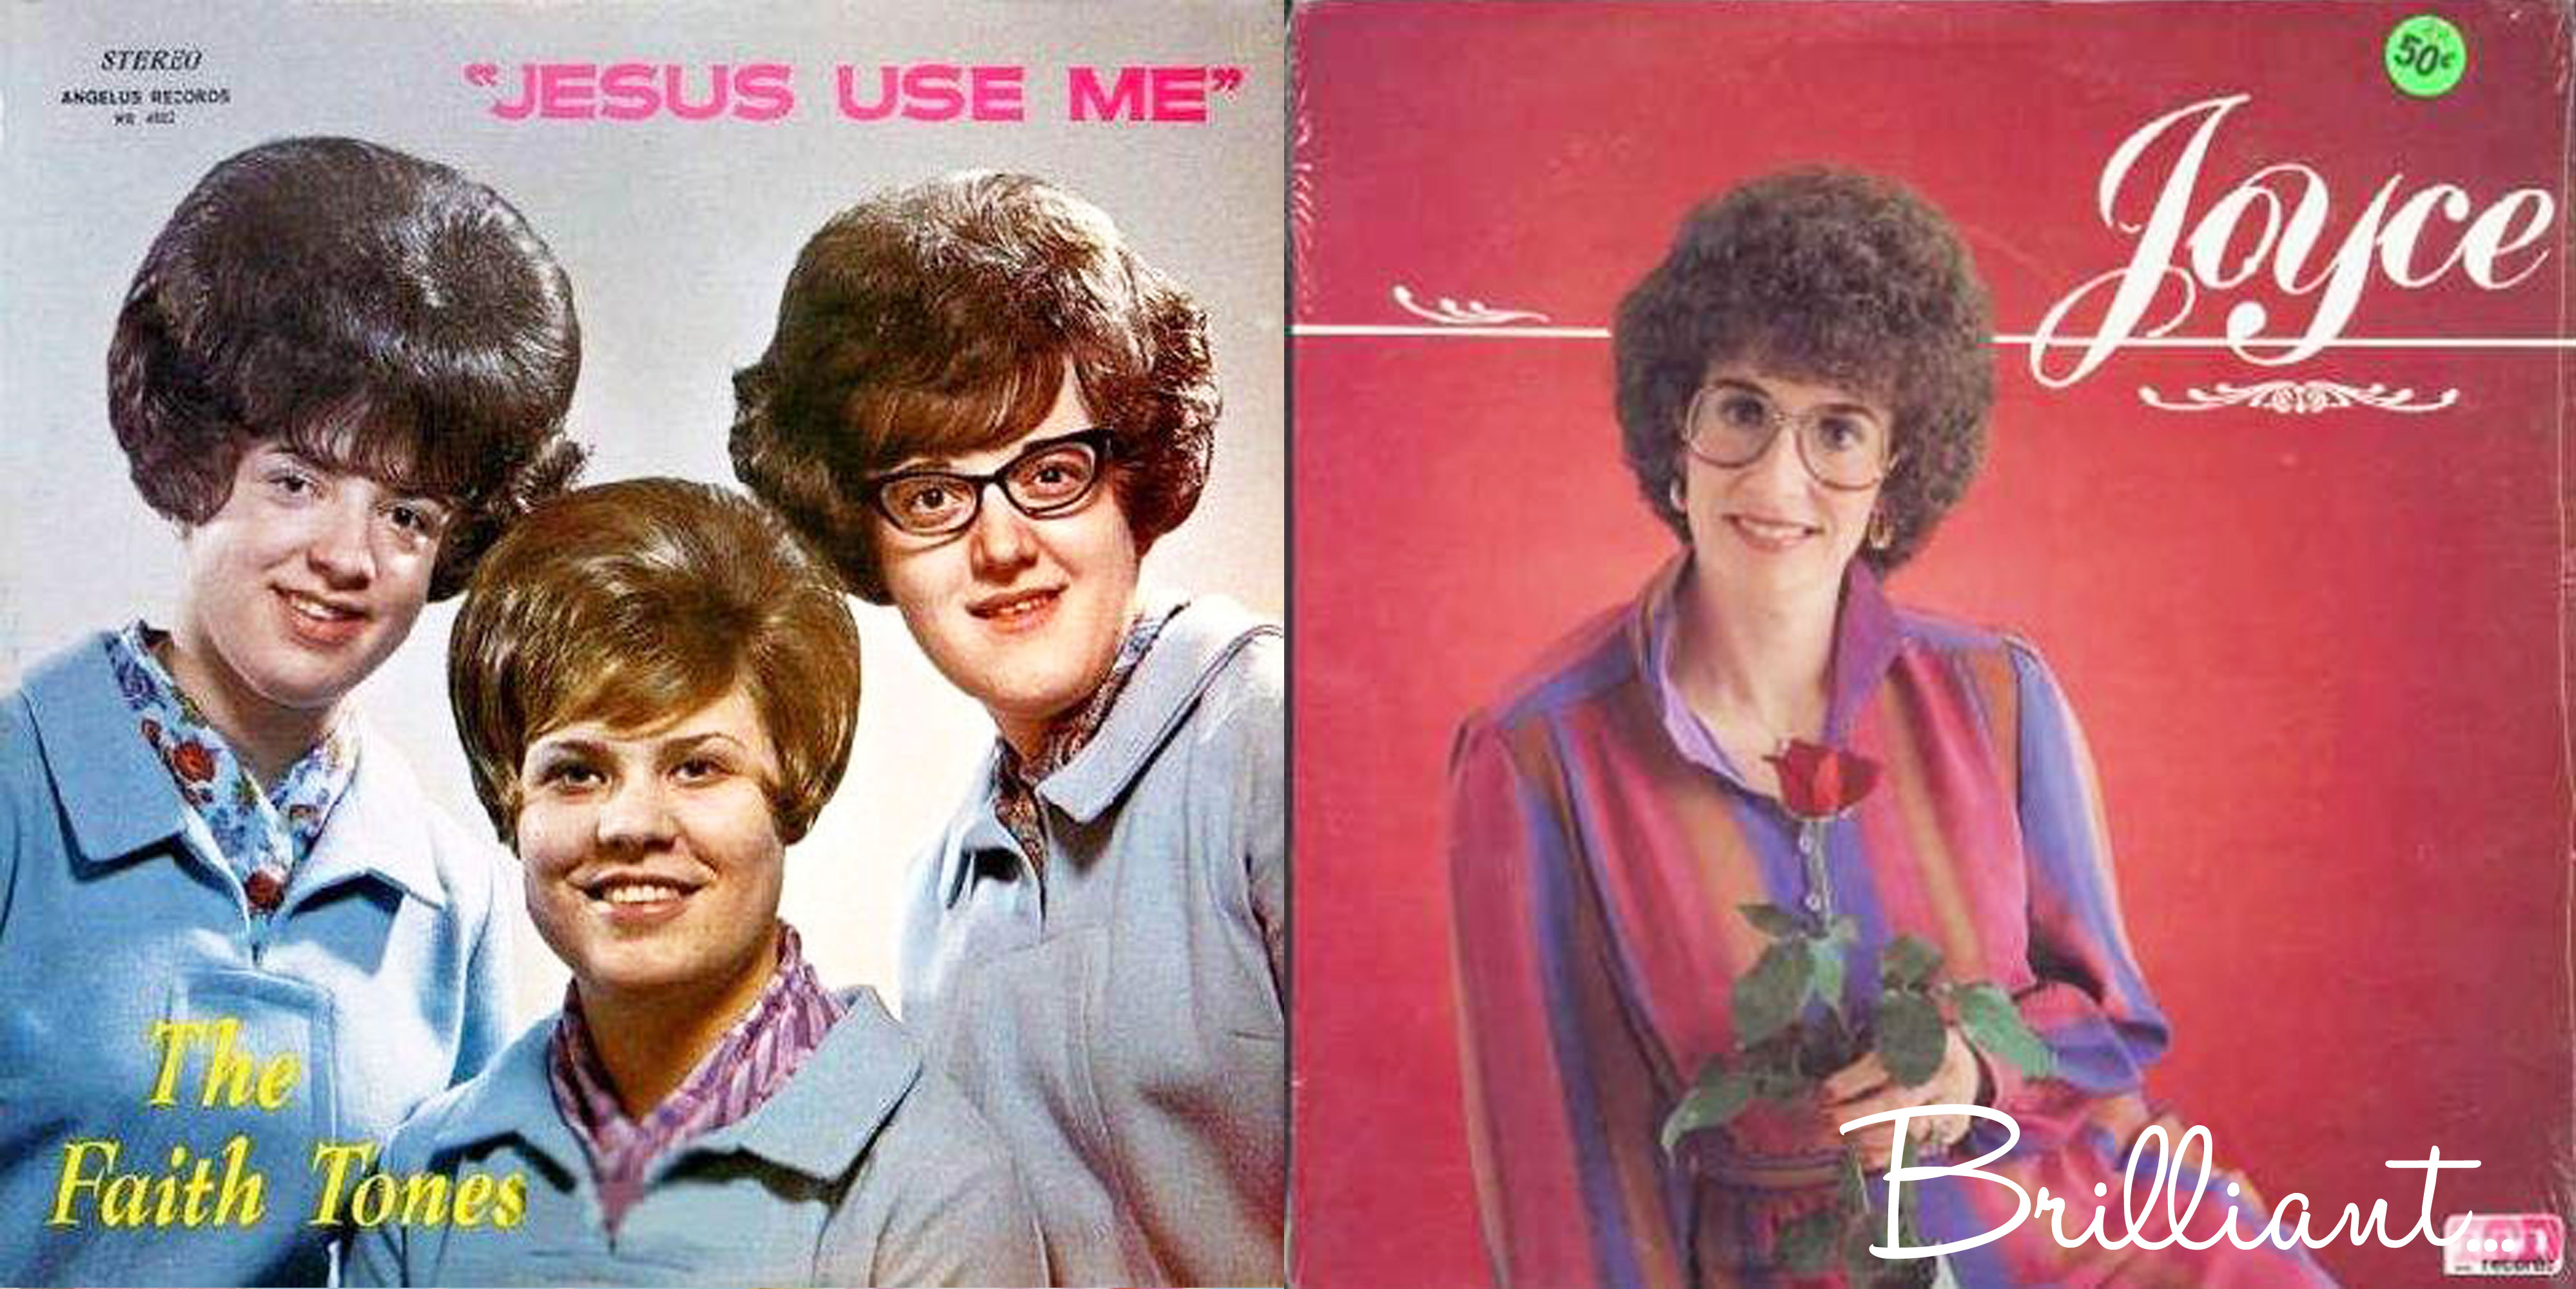 books-worst-album-covers-of-all-times.jpg